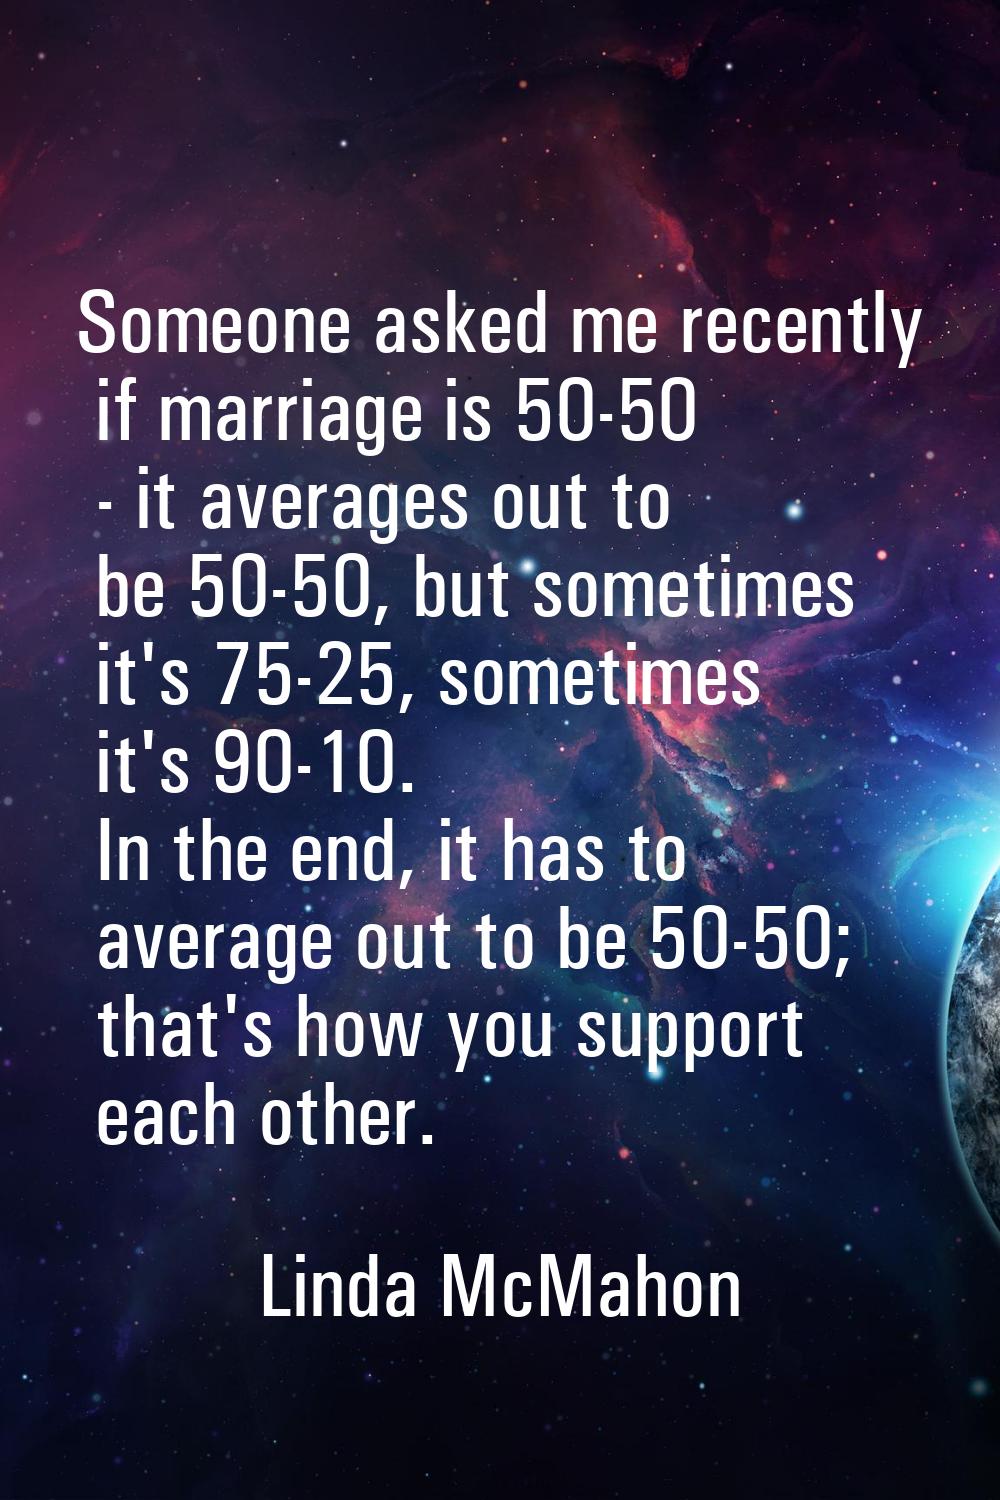 Someone asked me recently if marriage is 50-50 - it averages out to be 50-50, but sometimes it's 75